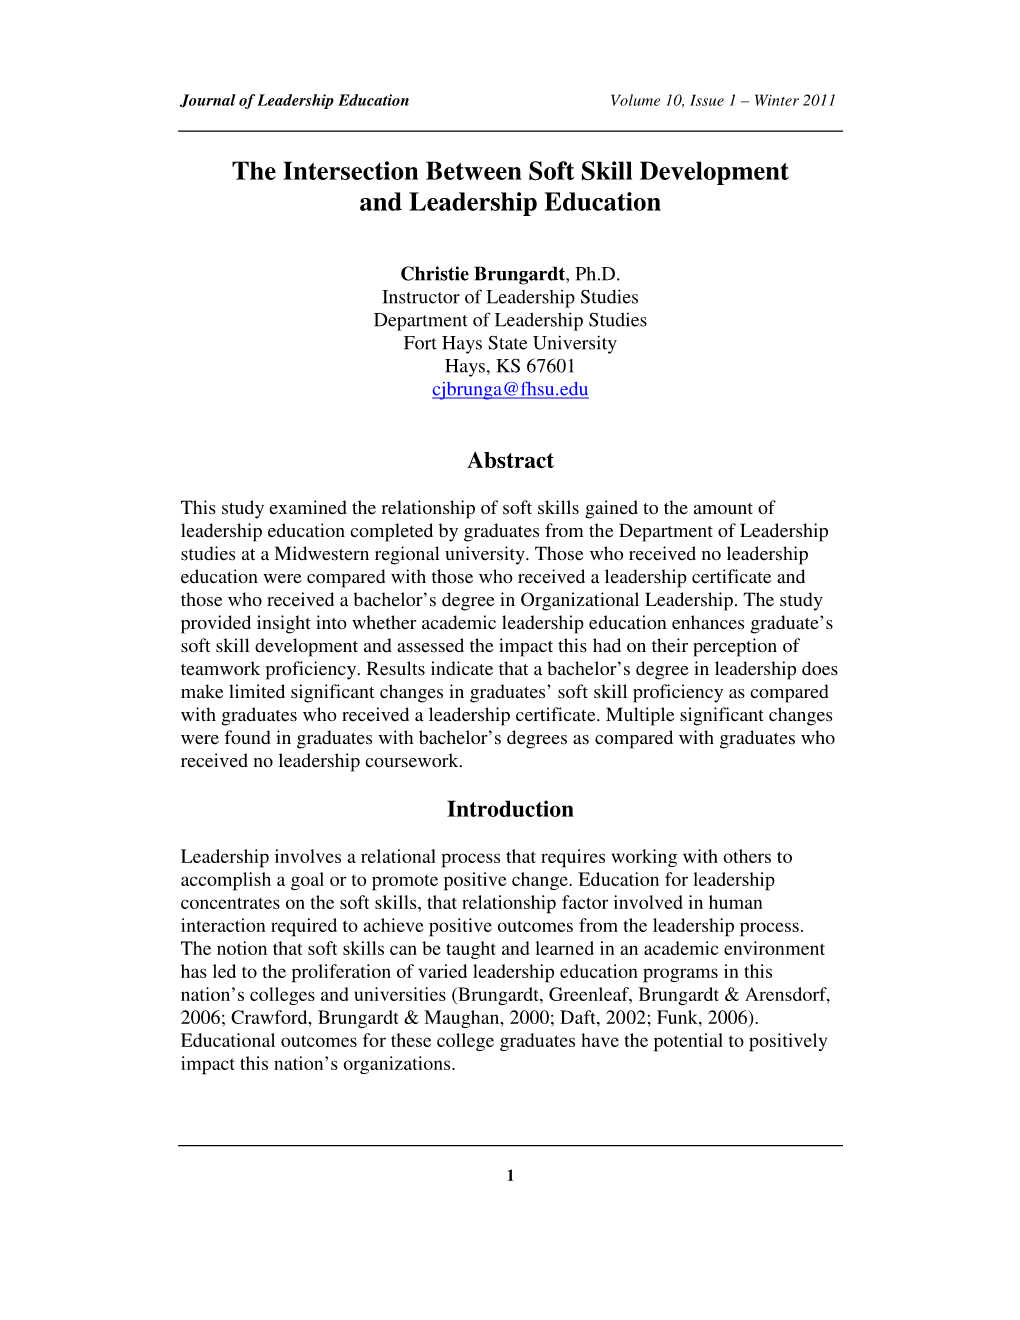 The Intersection Between Soft Skill Development and Leadership Education